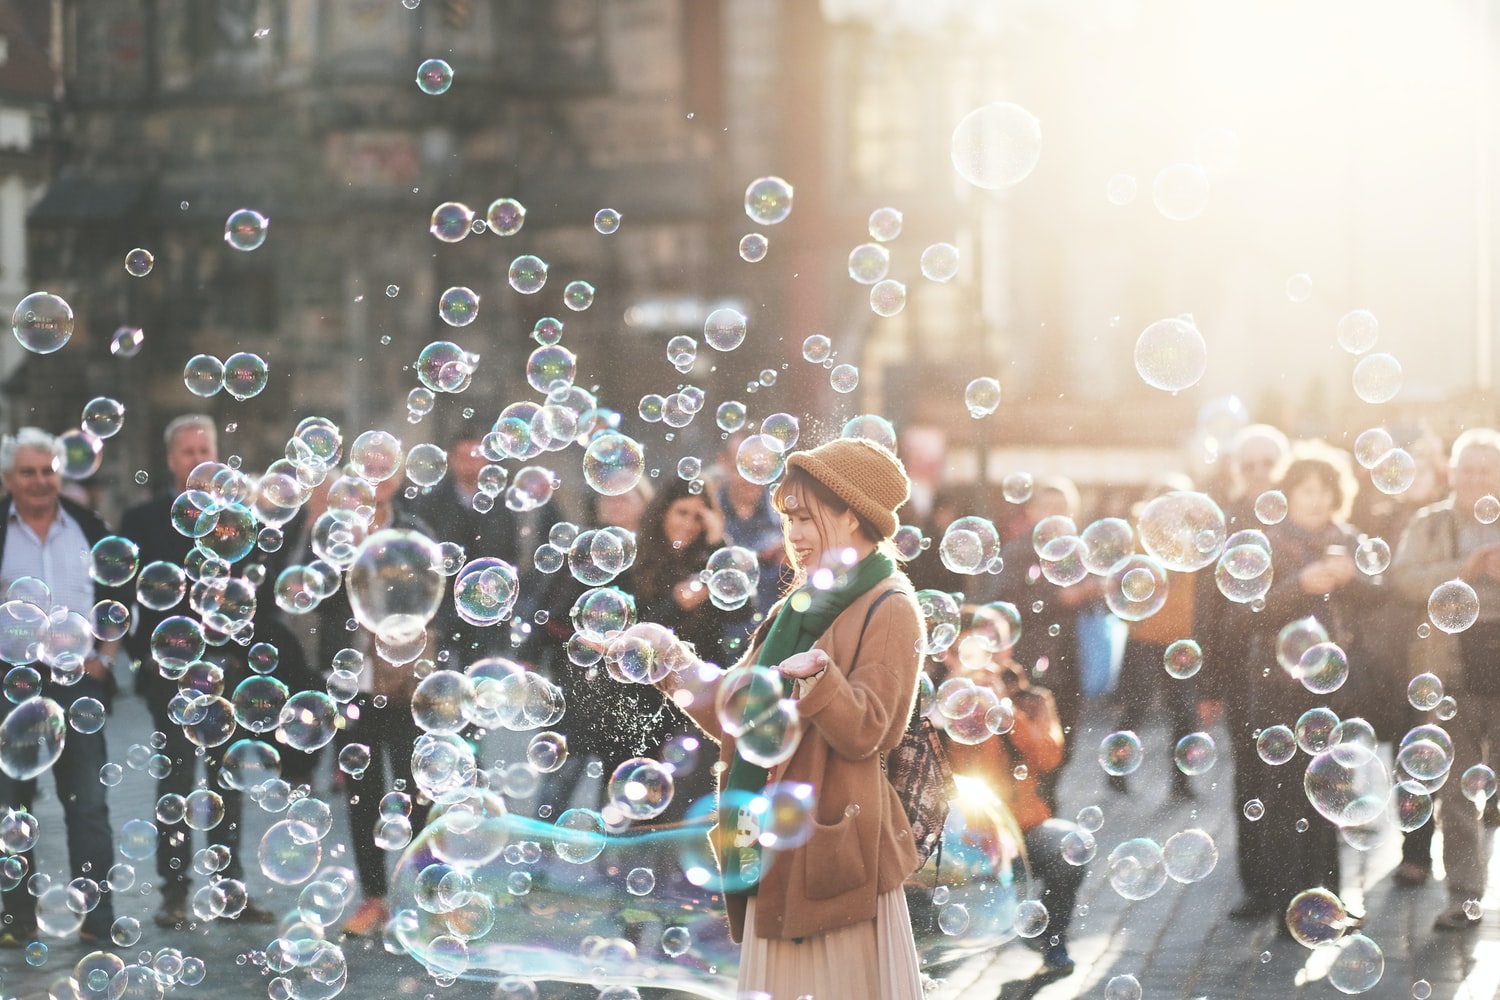 Woman blowing soap bubbles on a busy street